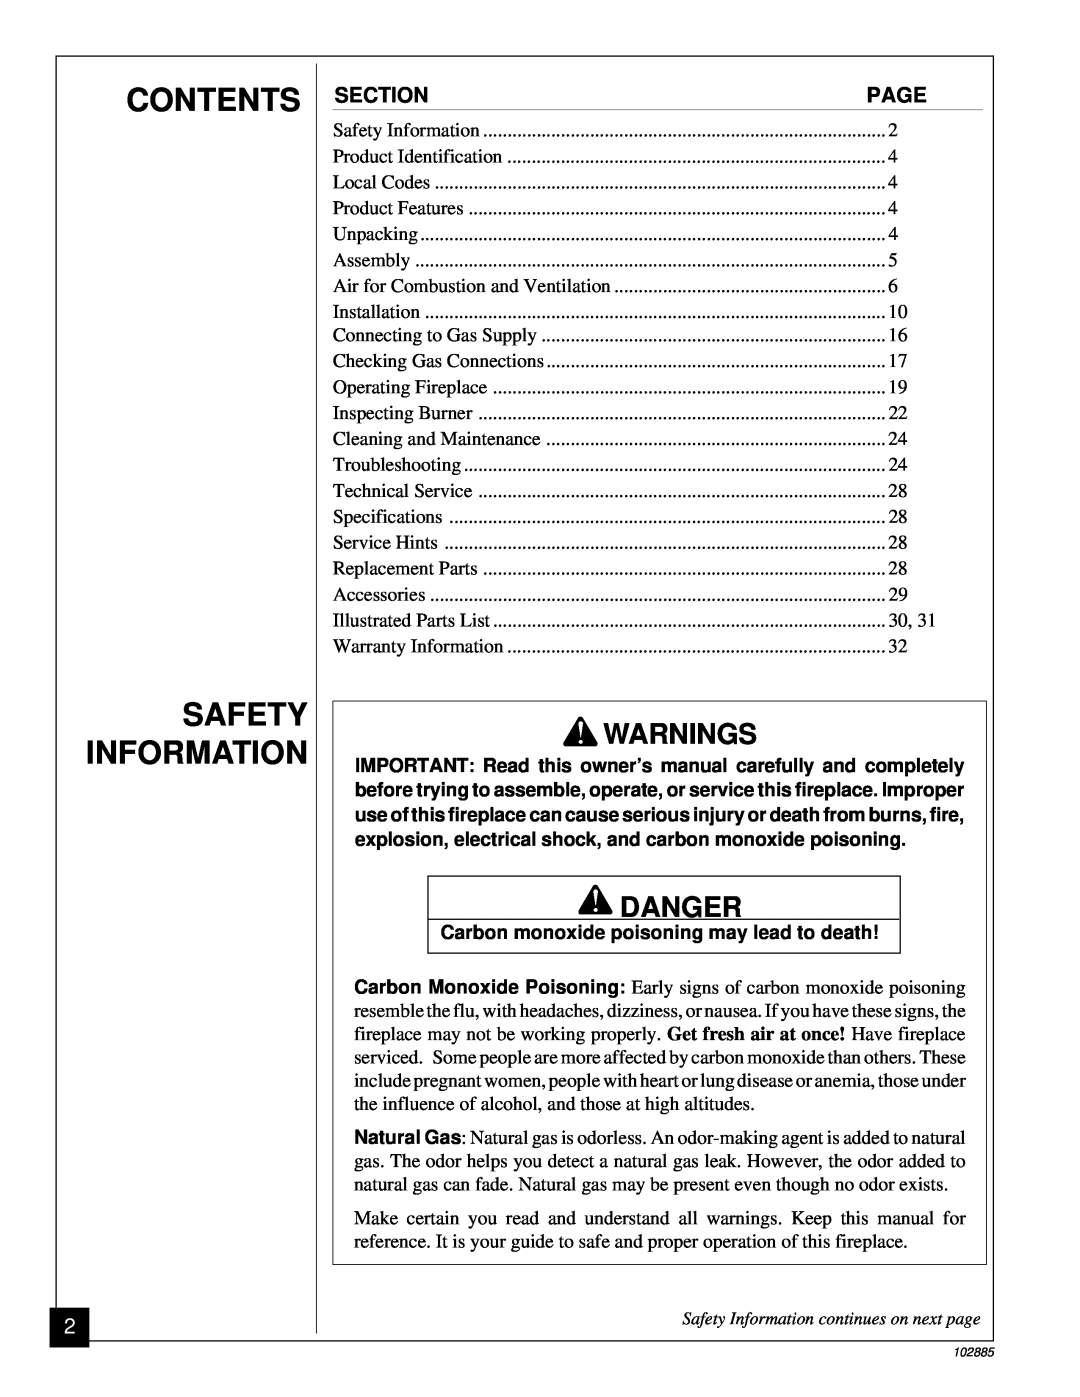 Vanguard Heating VMH26TN installation manual Contents Safety Information, Section, Page 